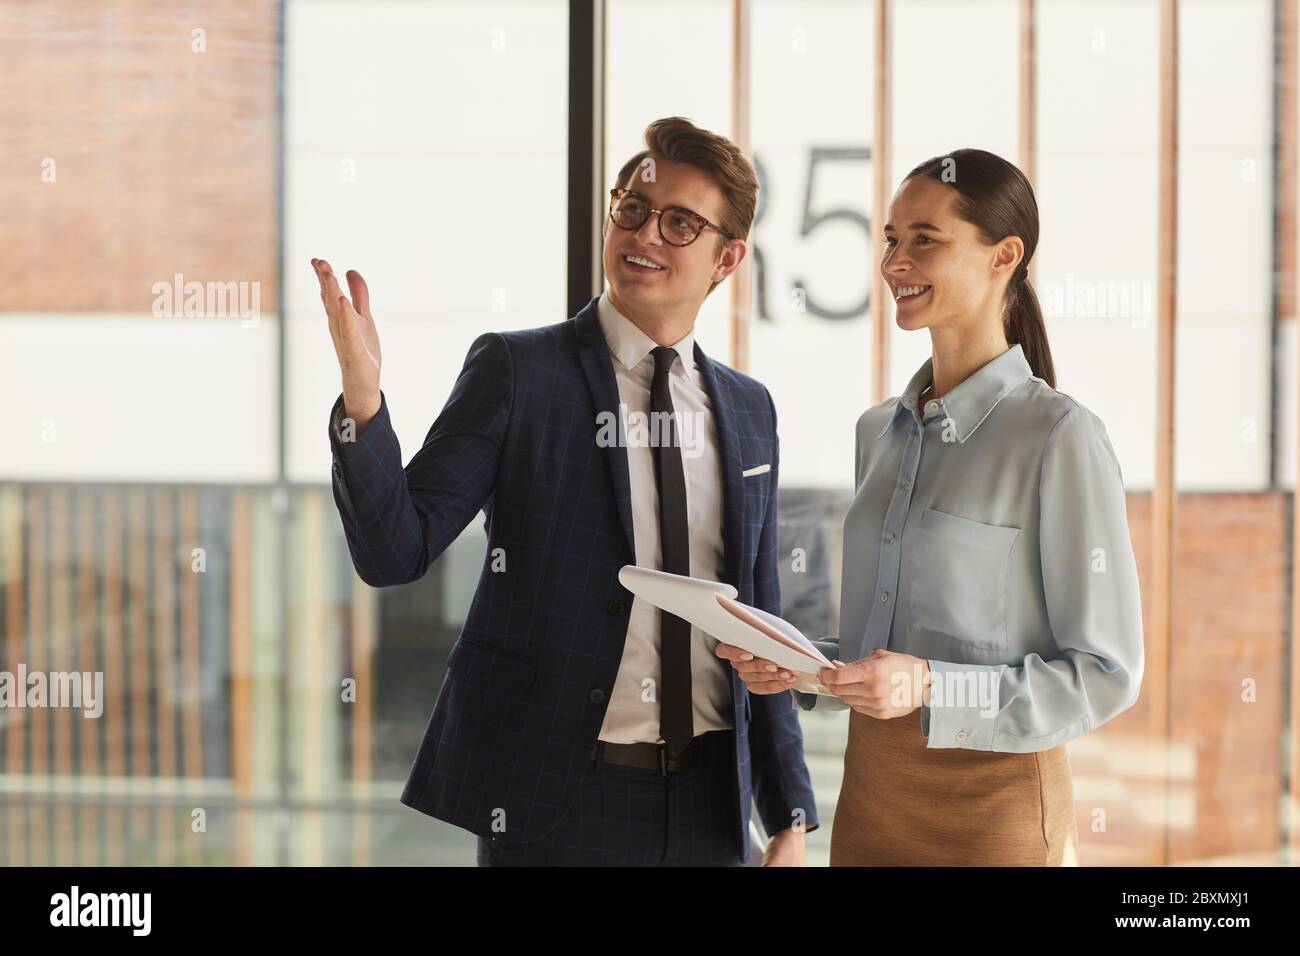 Waist up portrait of smiling real estate agent discussing property with female client and pointing up while standing in empty office building interior Stock Photo